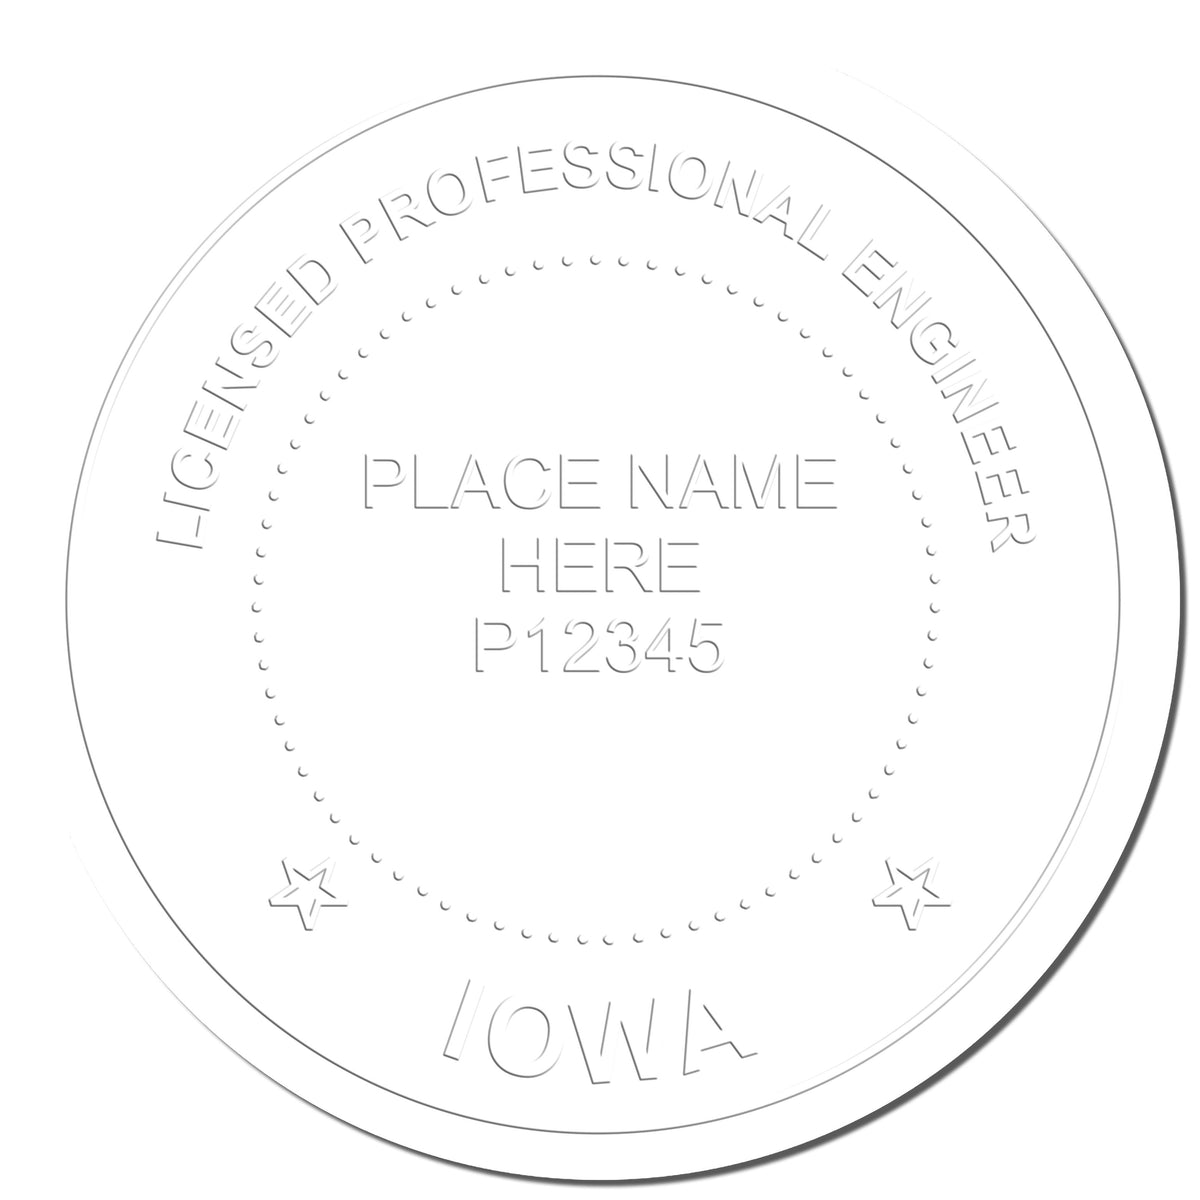 This paper is stamped with a sample imprint of the Hybrid Iowa Engineer Seal, signifying its quality and reliability.